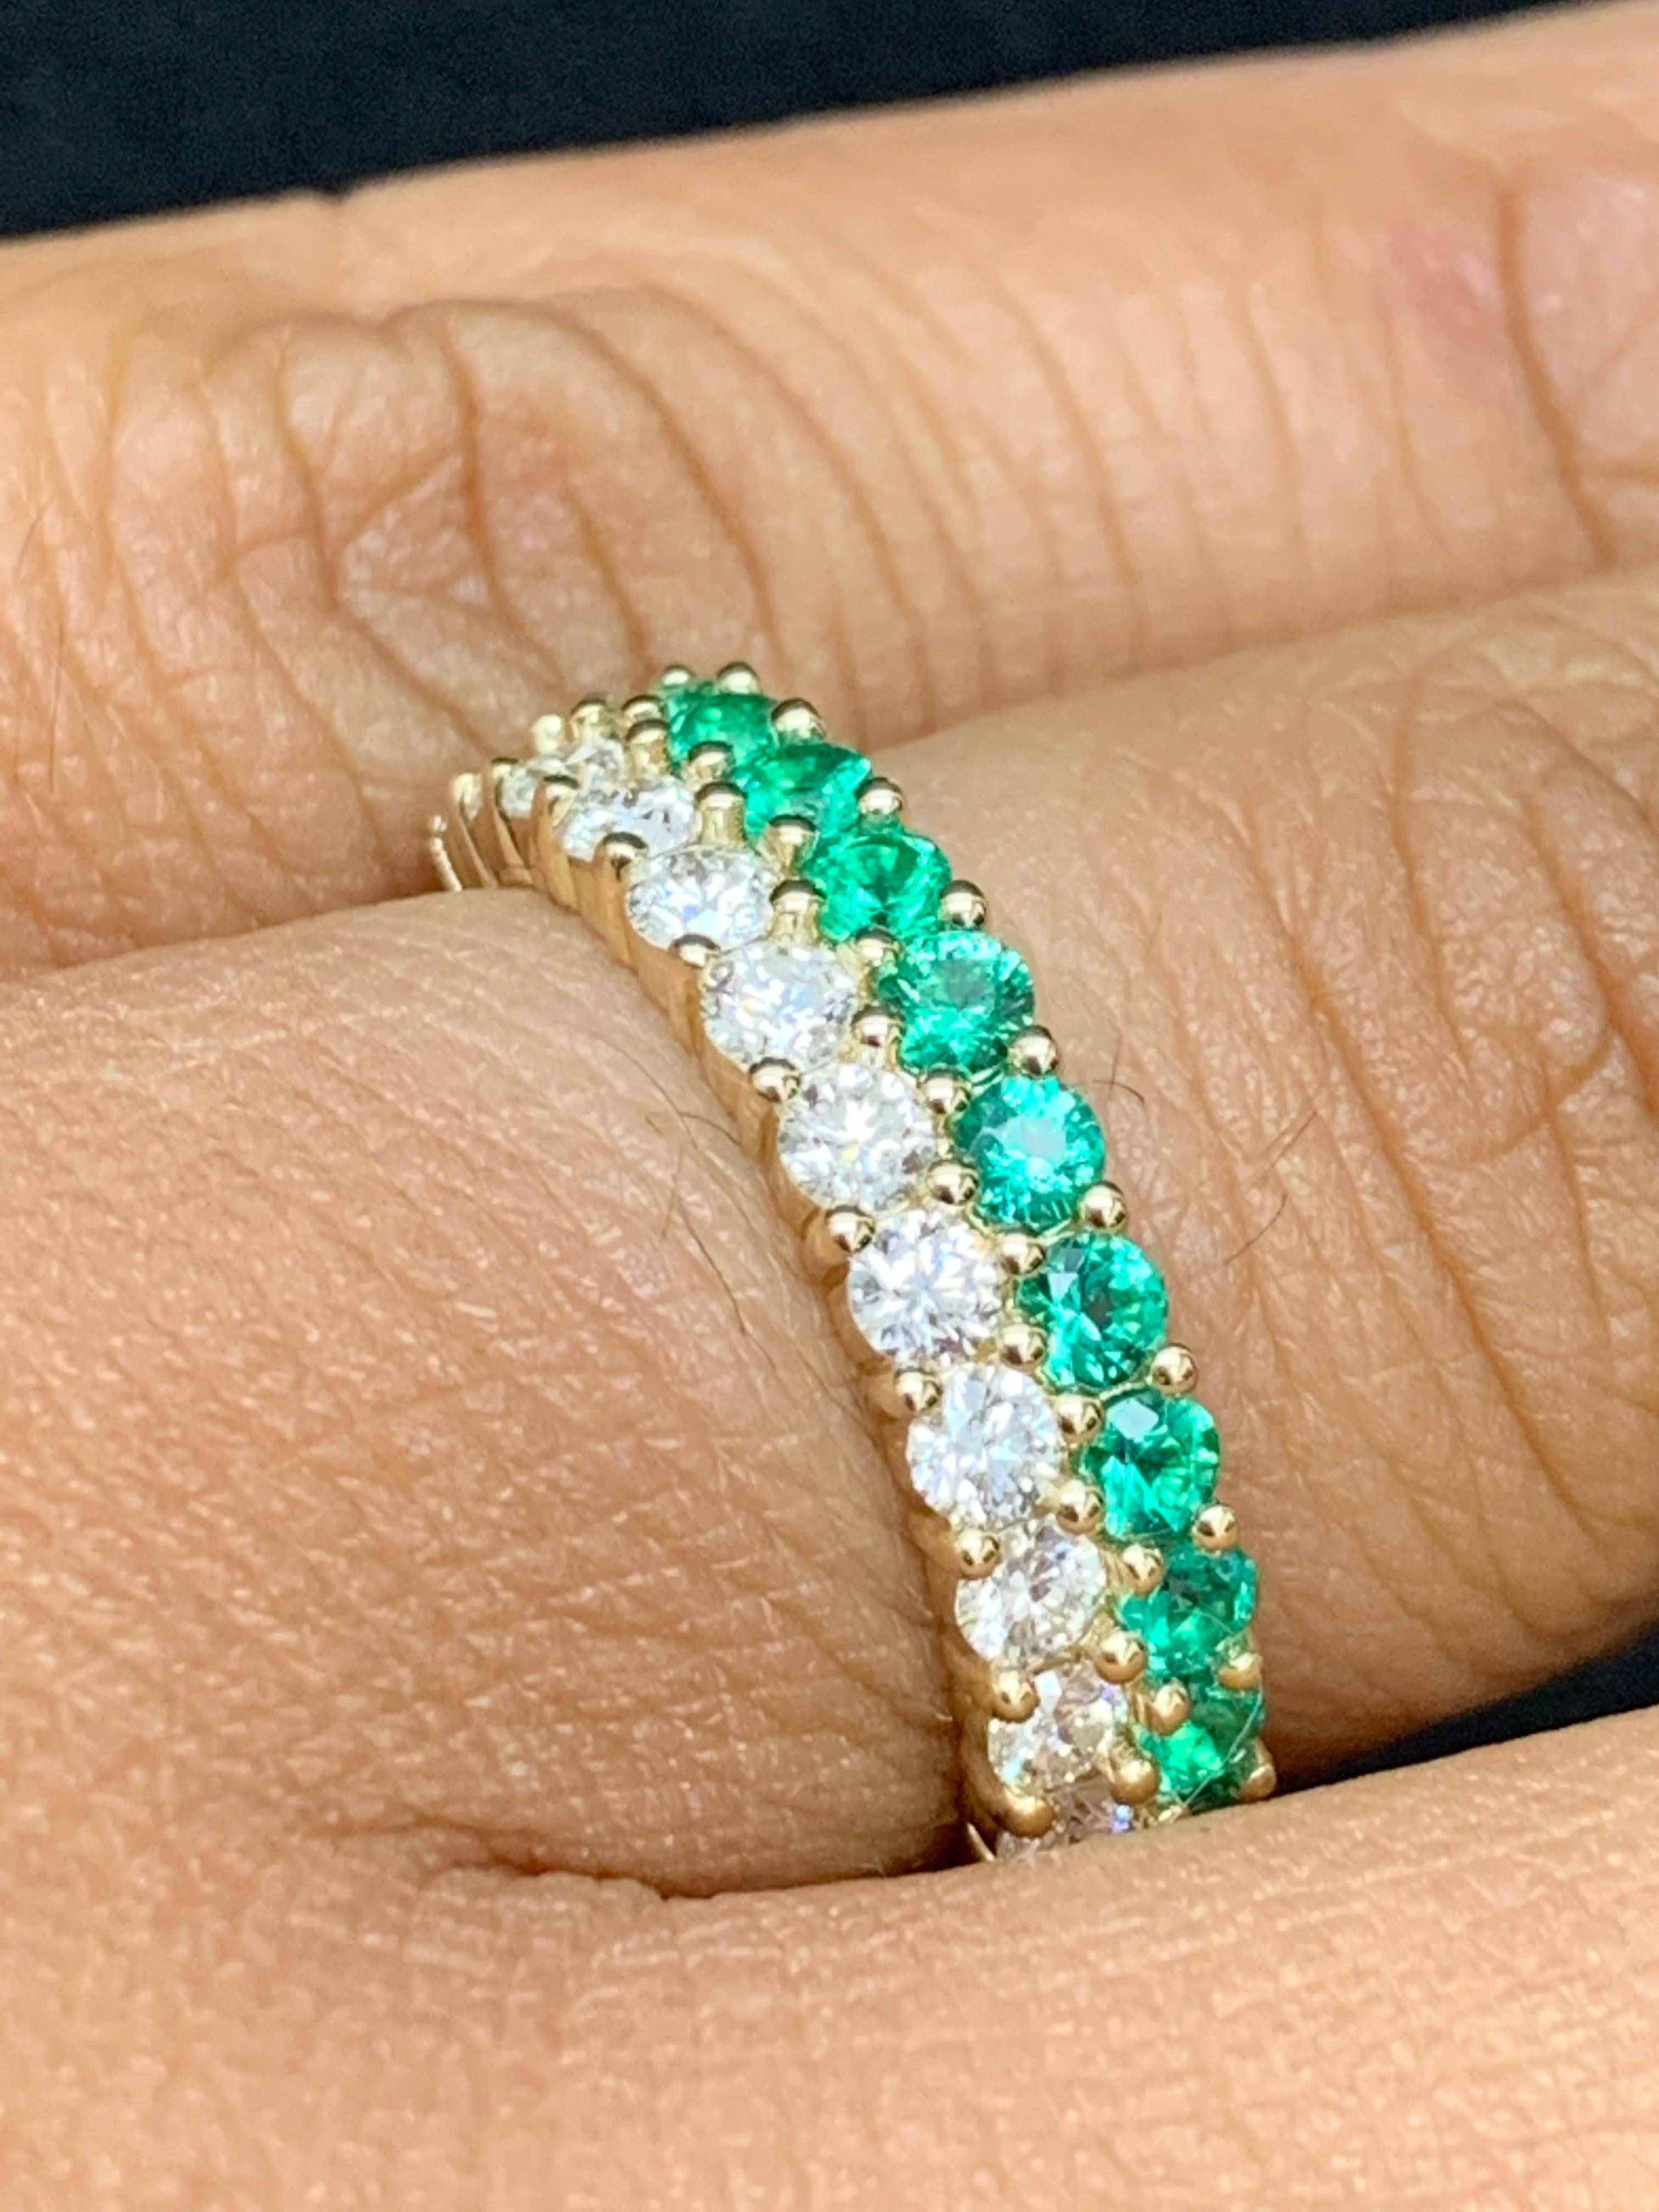 A unique and fashionable ring showcasing two rows of round-shape 13 emeralds and 14 diamonds, set in a band design. Emeralds weigh 0.55 carats and Diamonds weigh 0.70 carats total. A brilliant and masterfully-made piece.

Style available in